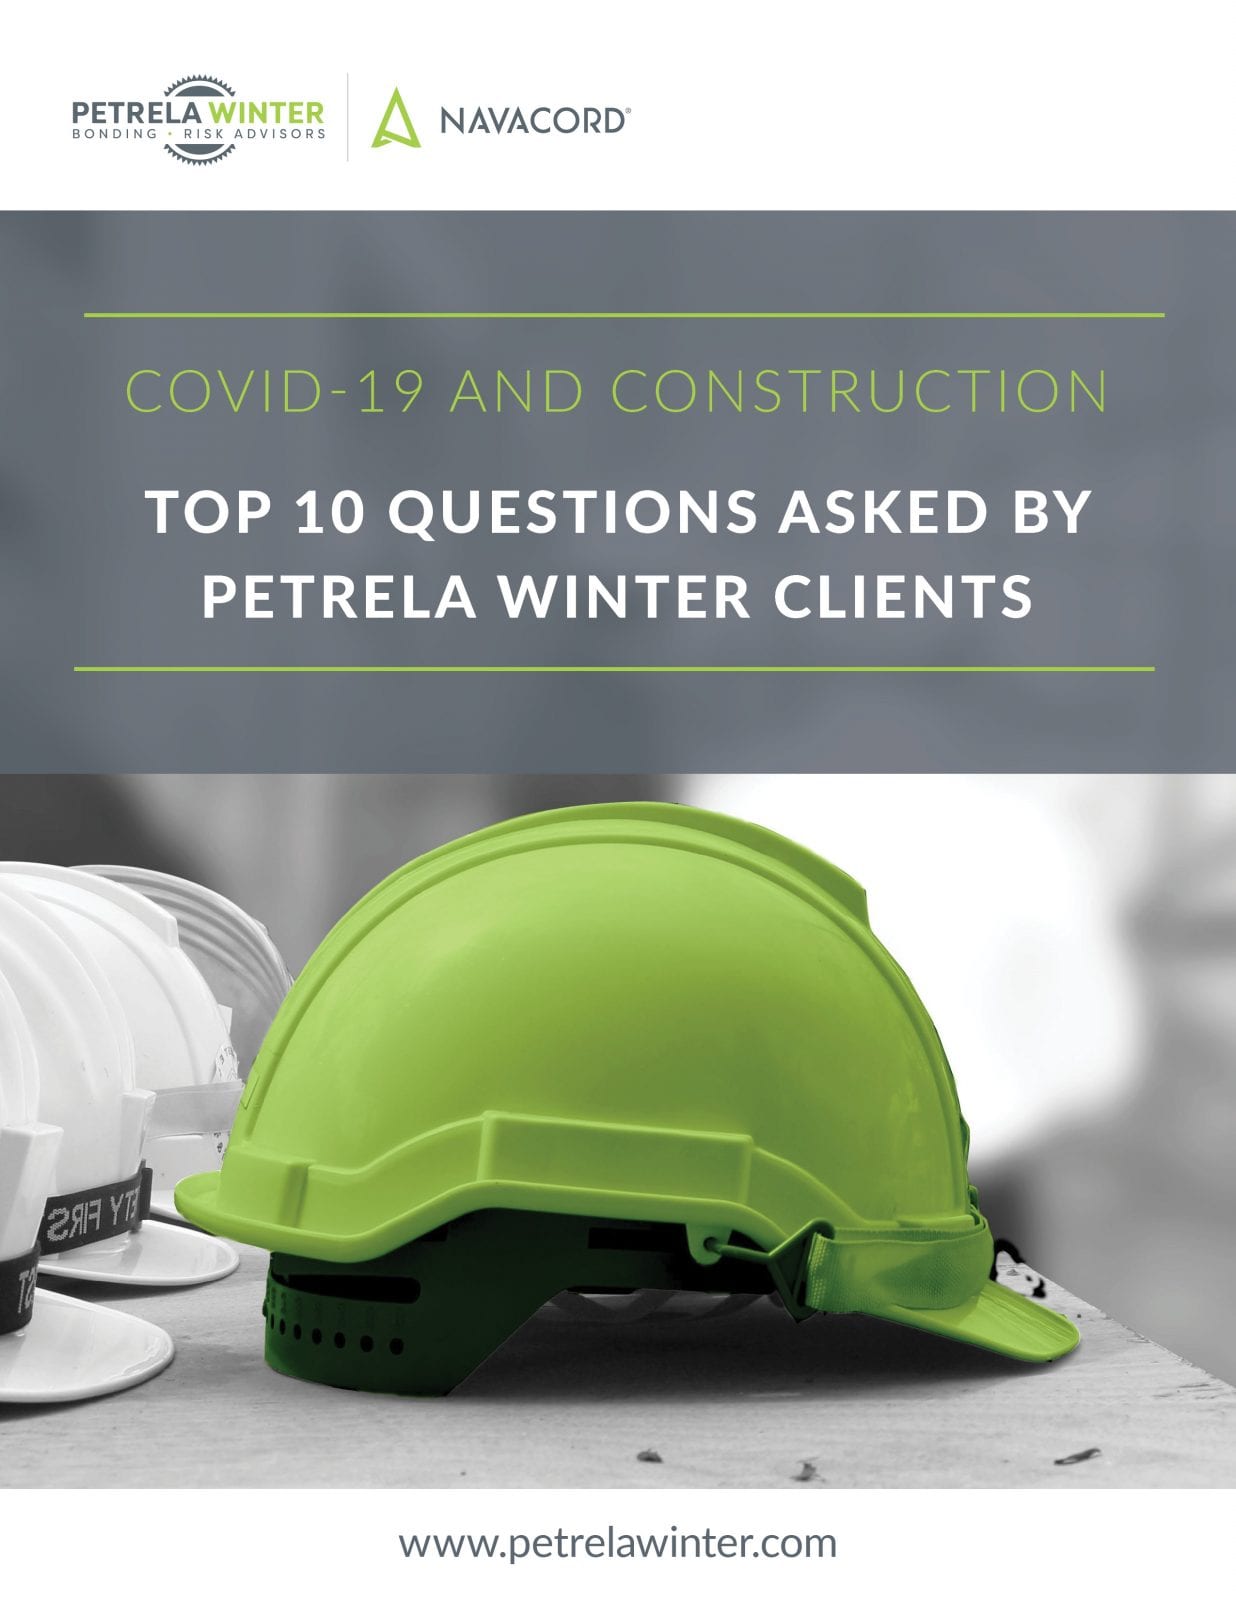 Top 10 Questions Asked by Petrela Winter Clients During COVID-19